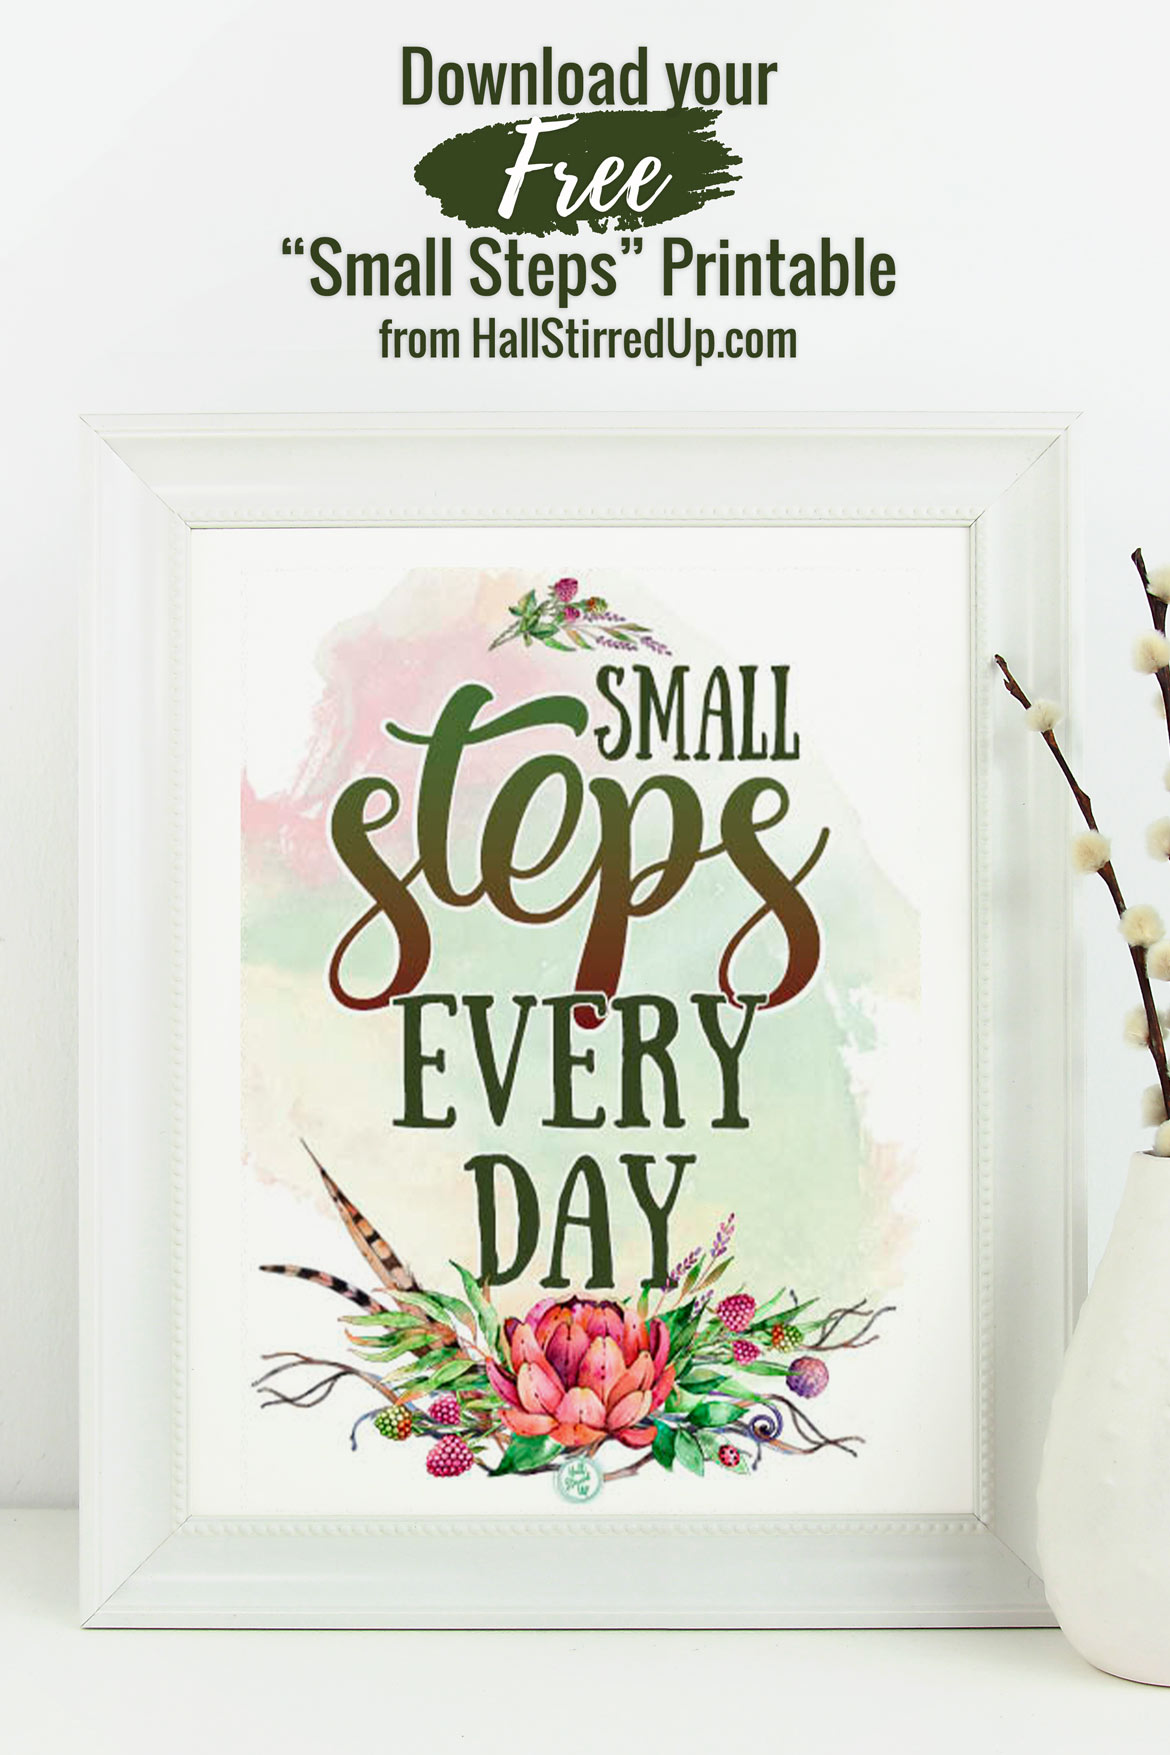 Taking small steps towards our big goals - Monthly Motivation includes printable